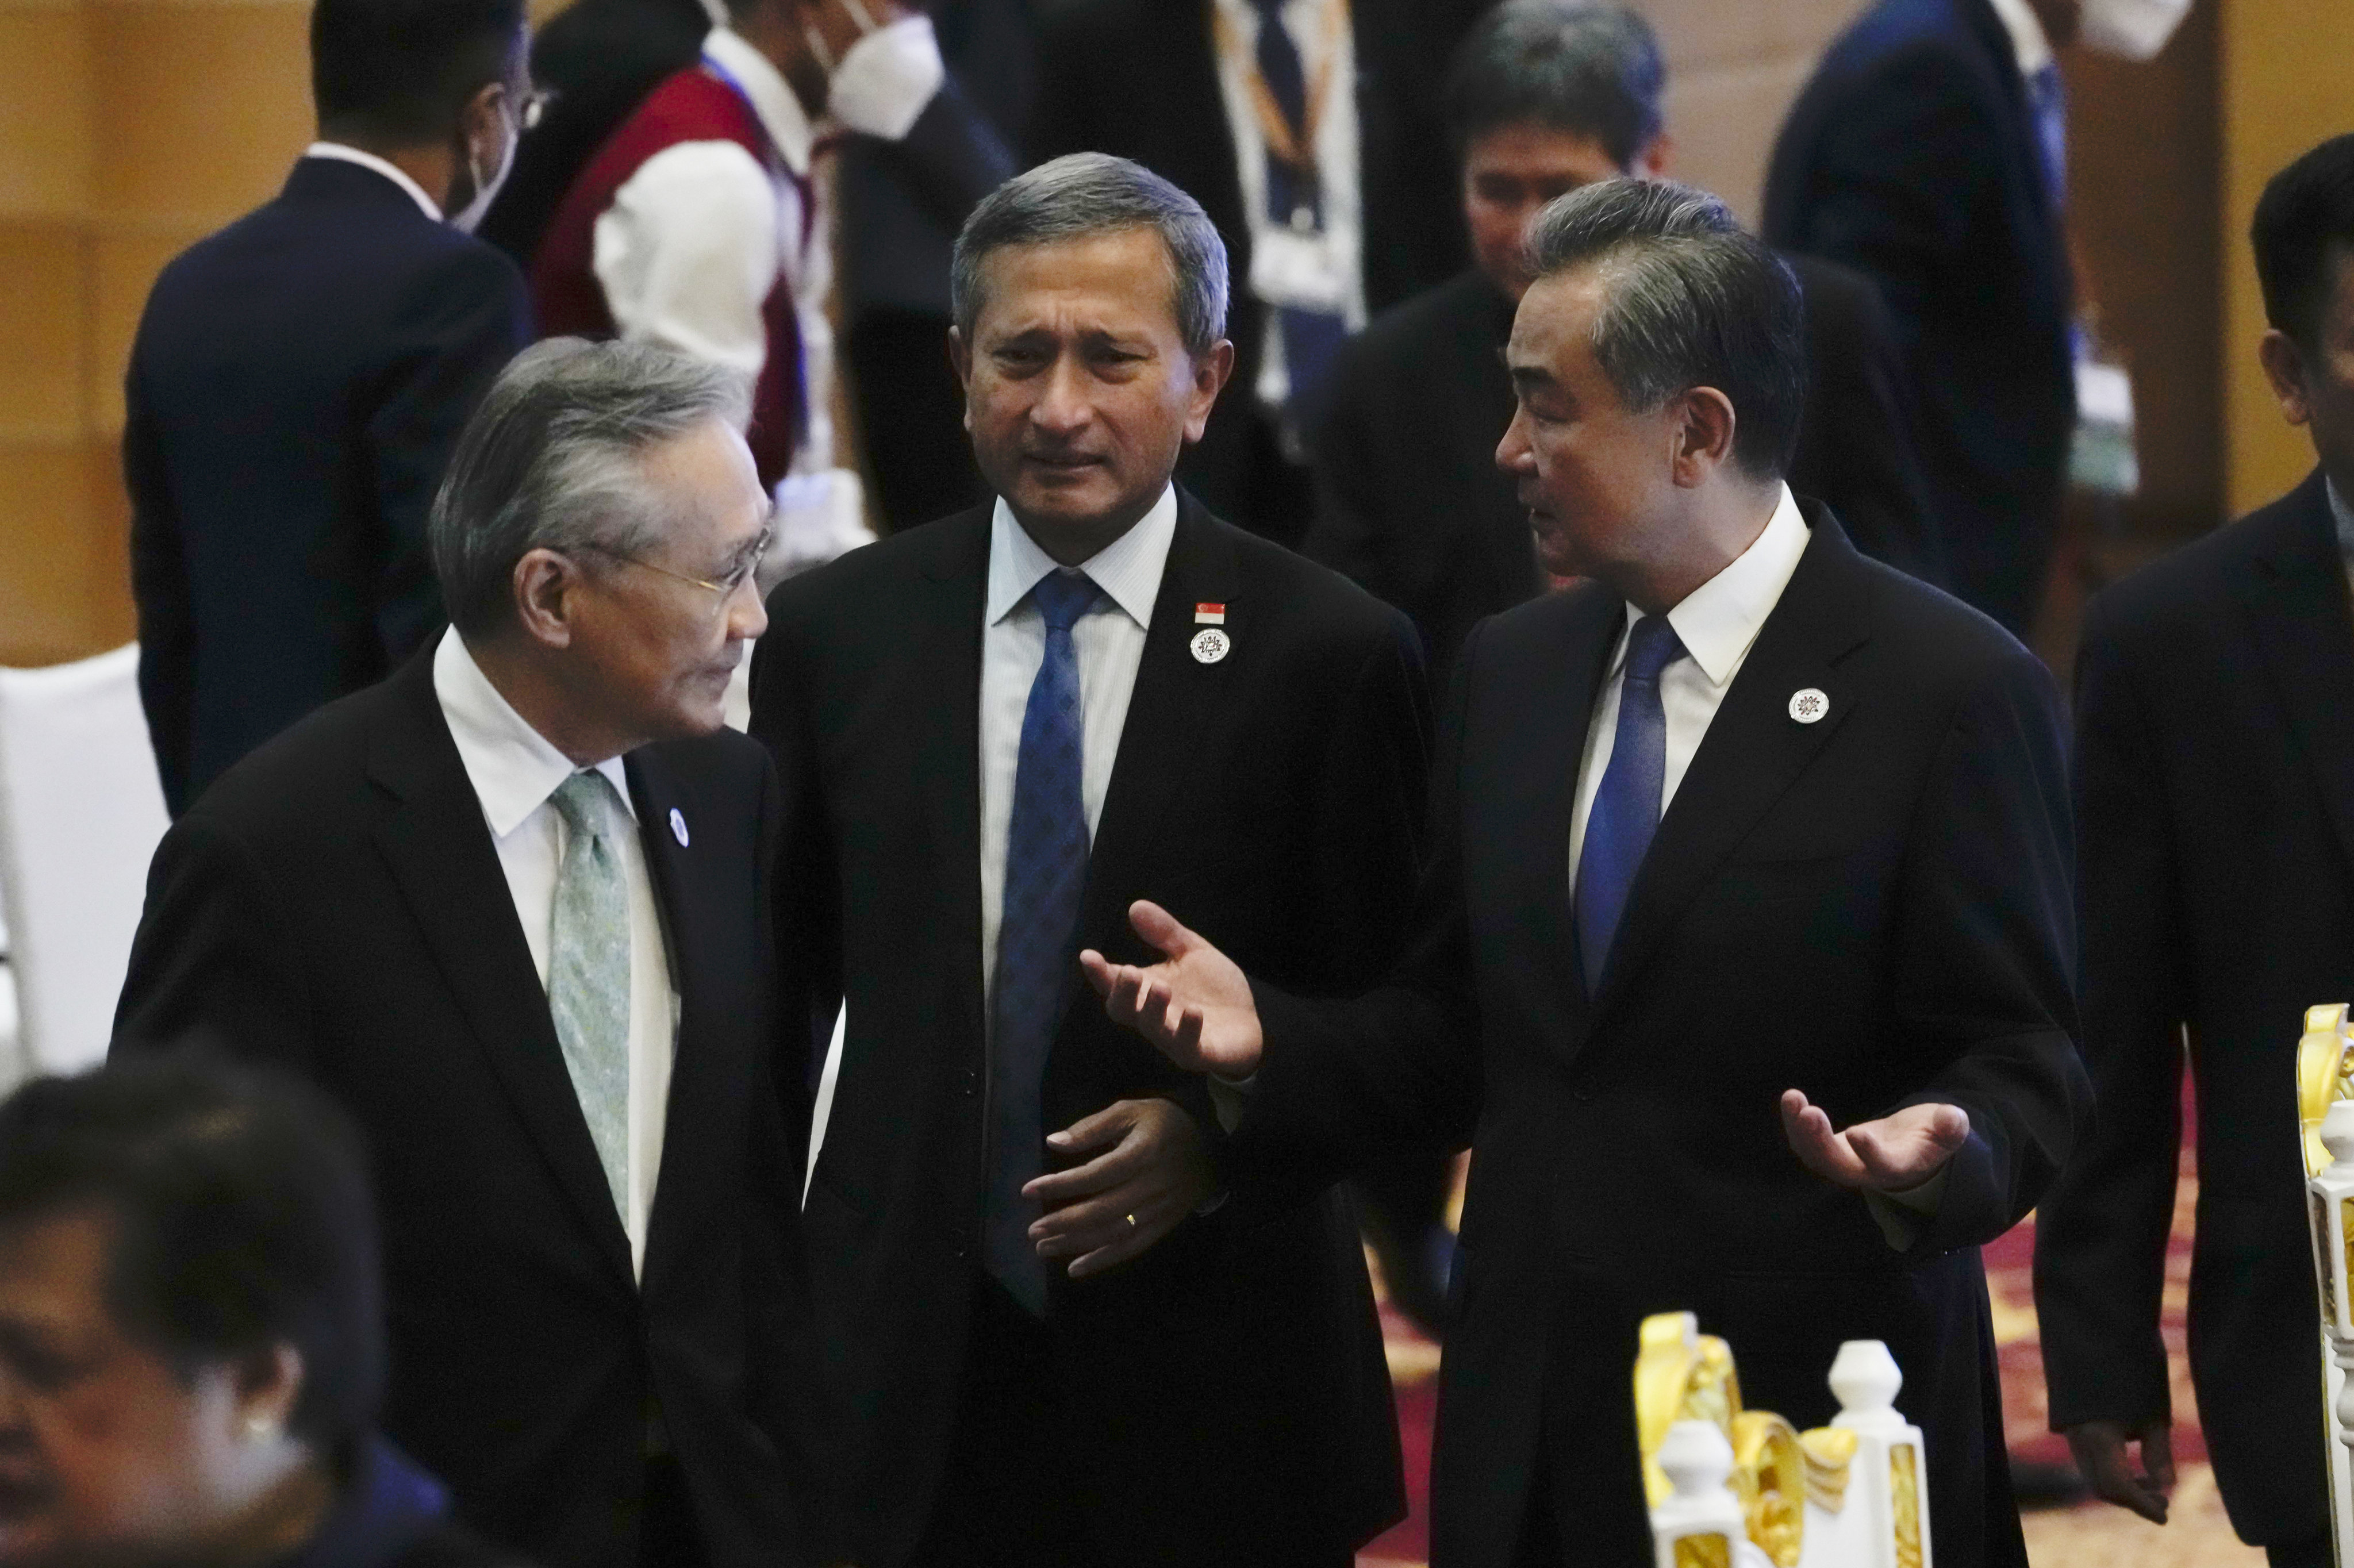 Chinese Foreign Minister Wang Yi (right) chats with Singapore’s Foreign Minister Vivian Balakrishnan (centre) and Thailand’s Foreign Minister Don Pramudwinai at the Asean-China Ministerial Meeting in Phnom Penh, Cambodia in August 2022. Photo: AP